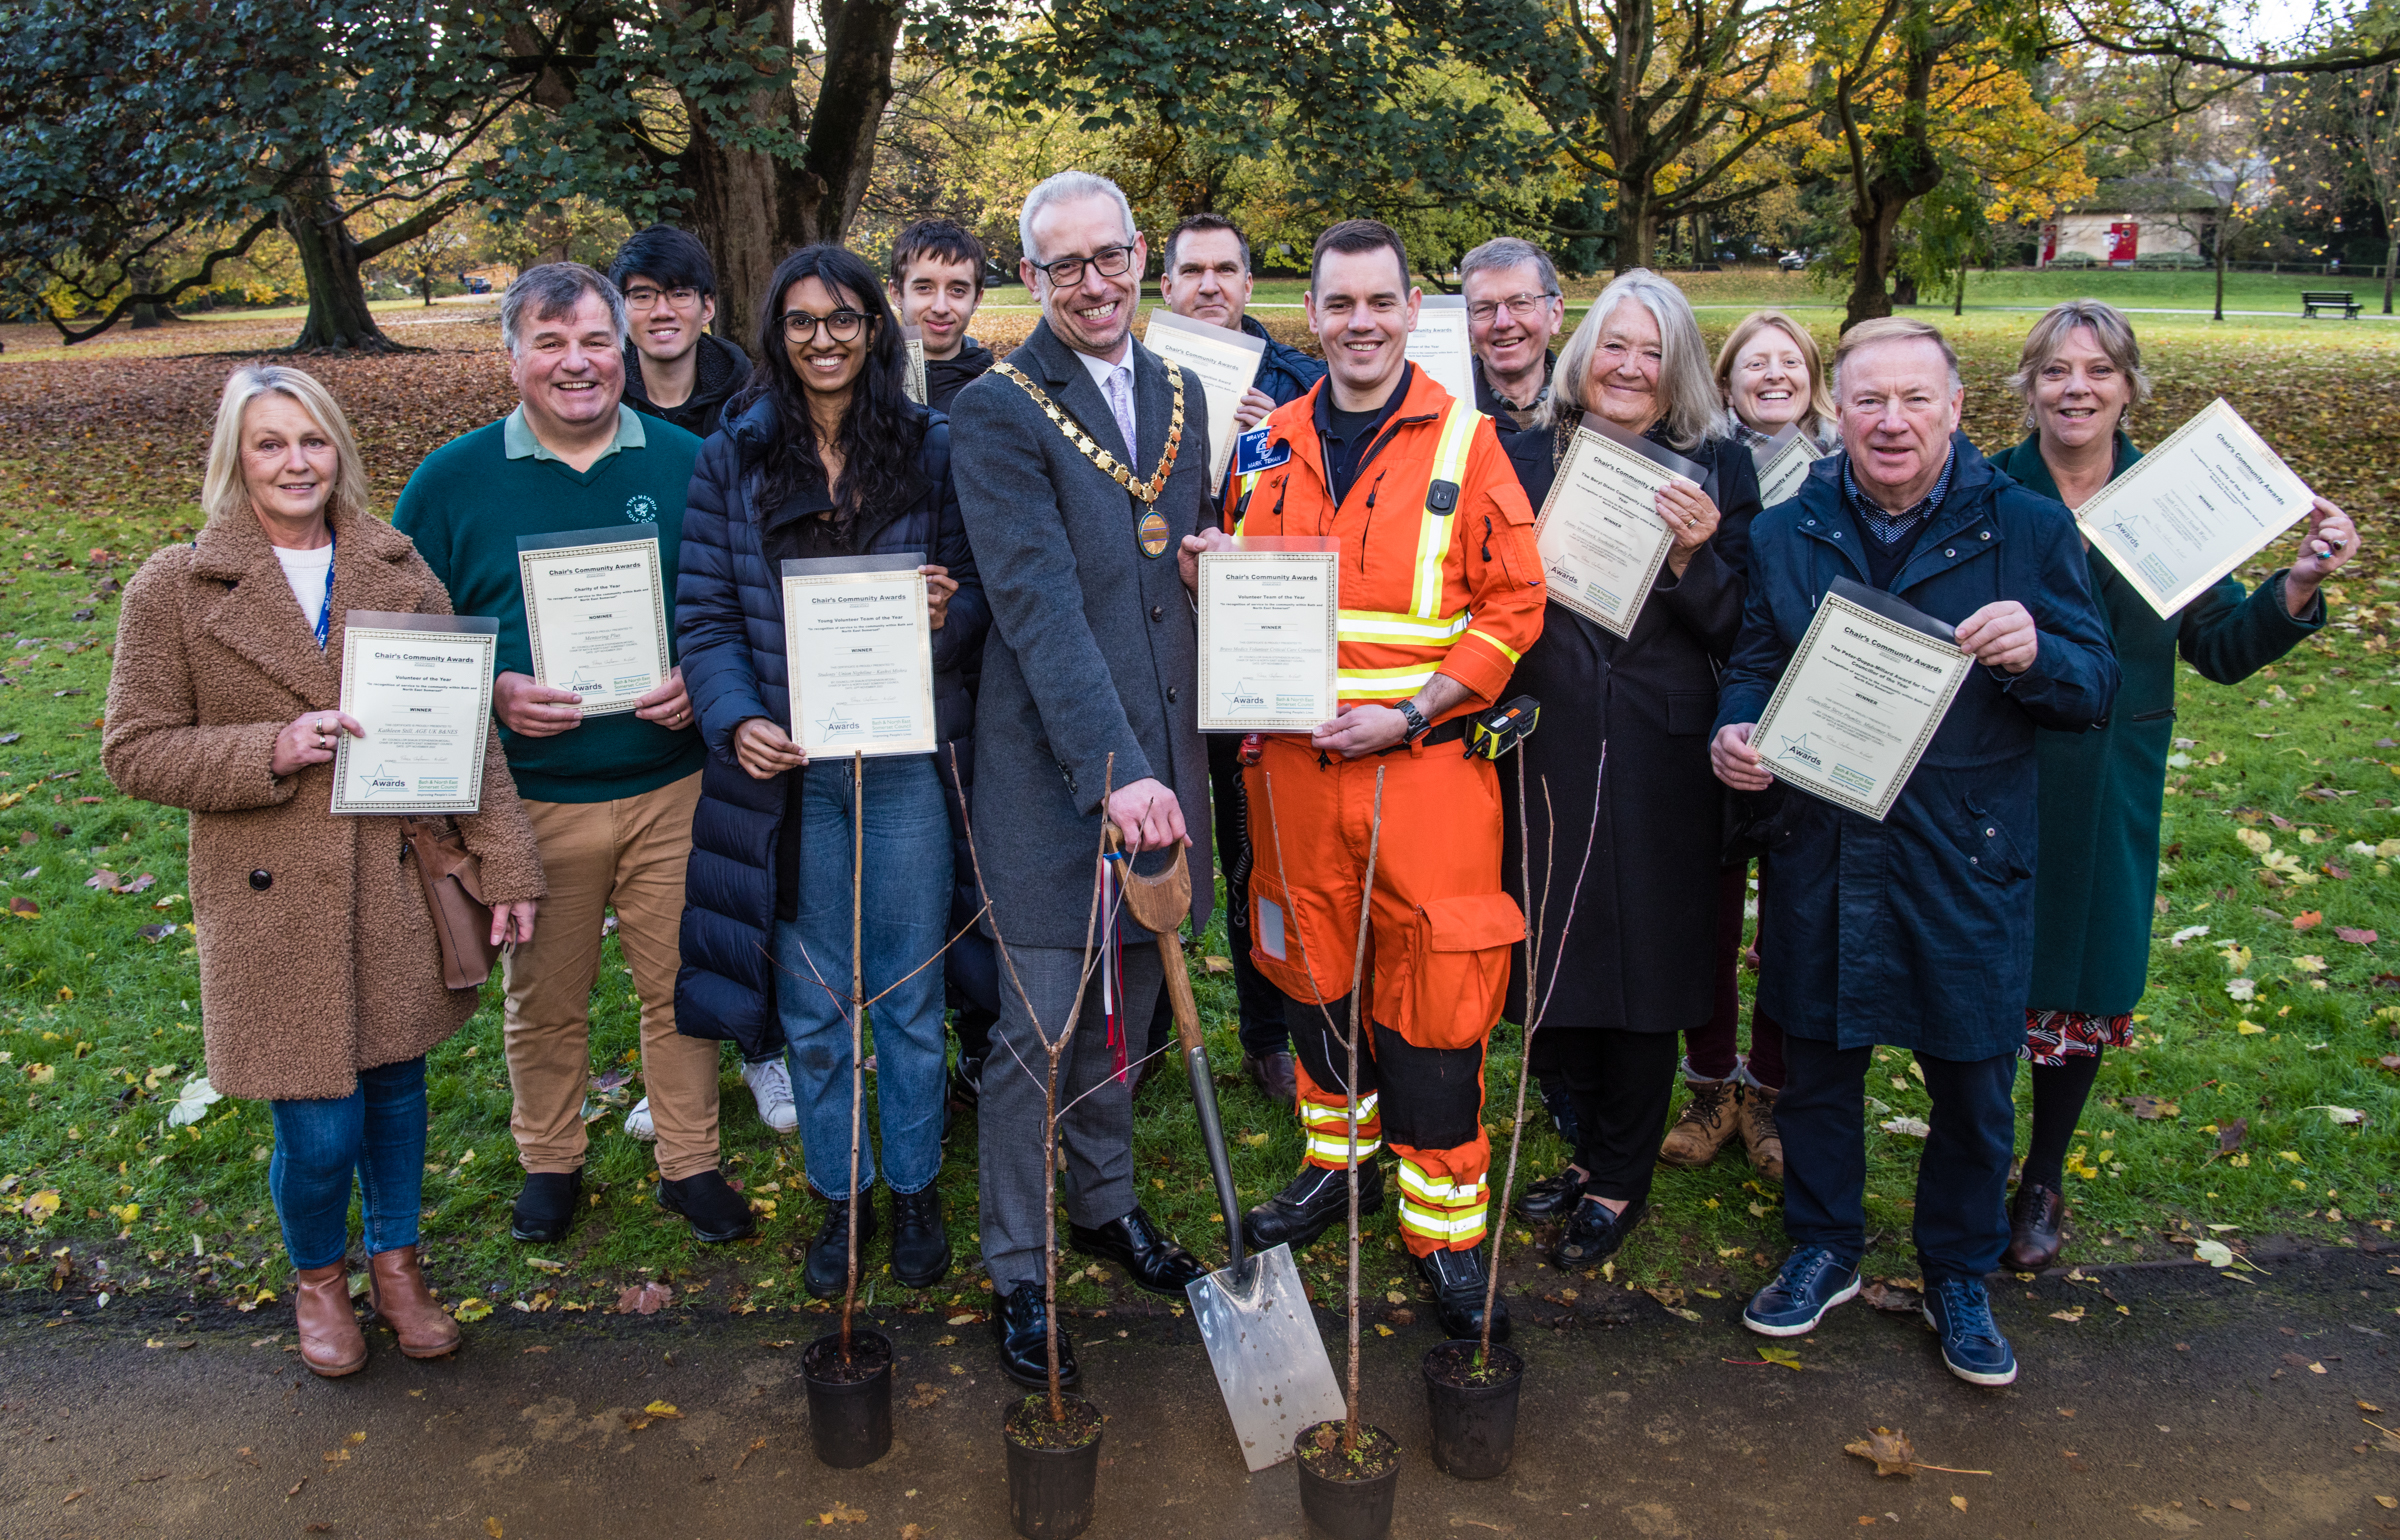 Group of winners of Community AWards 2022 in Henrietta Park, Bath with new trees planted